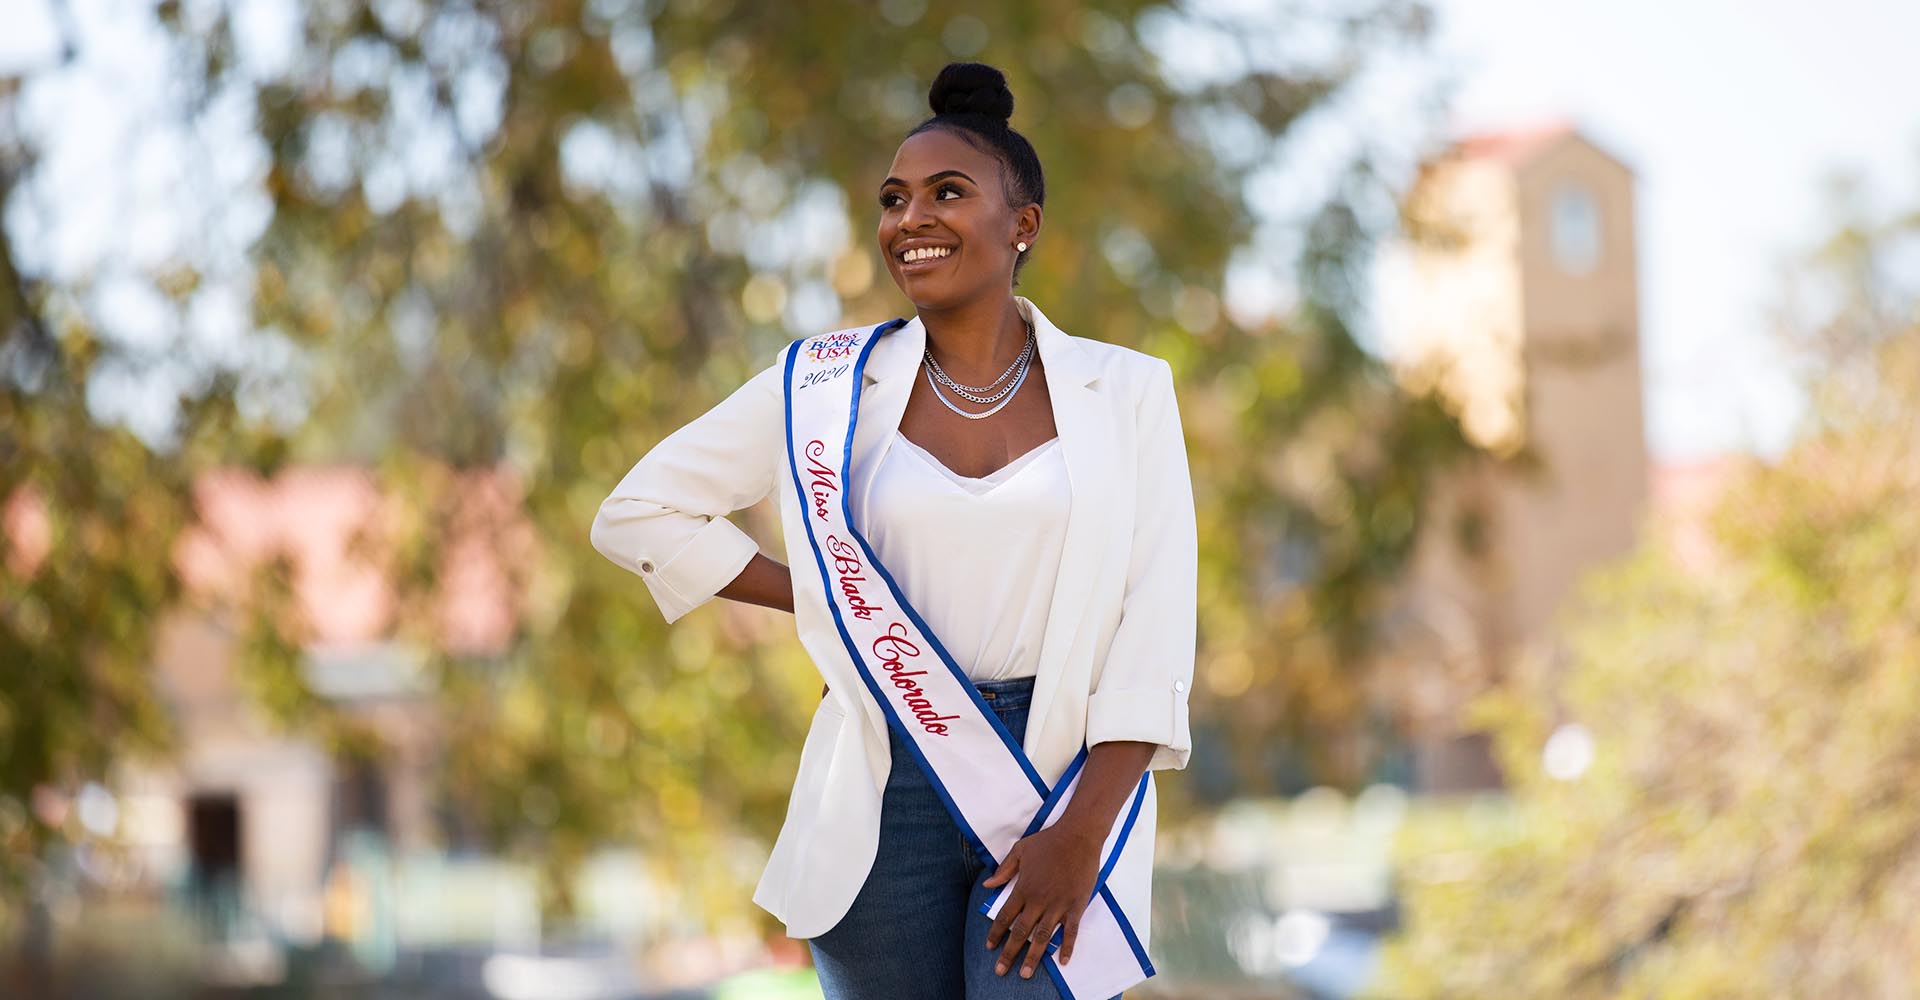 Pageant provides platform for racial-justice message